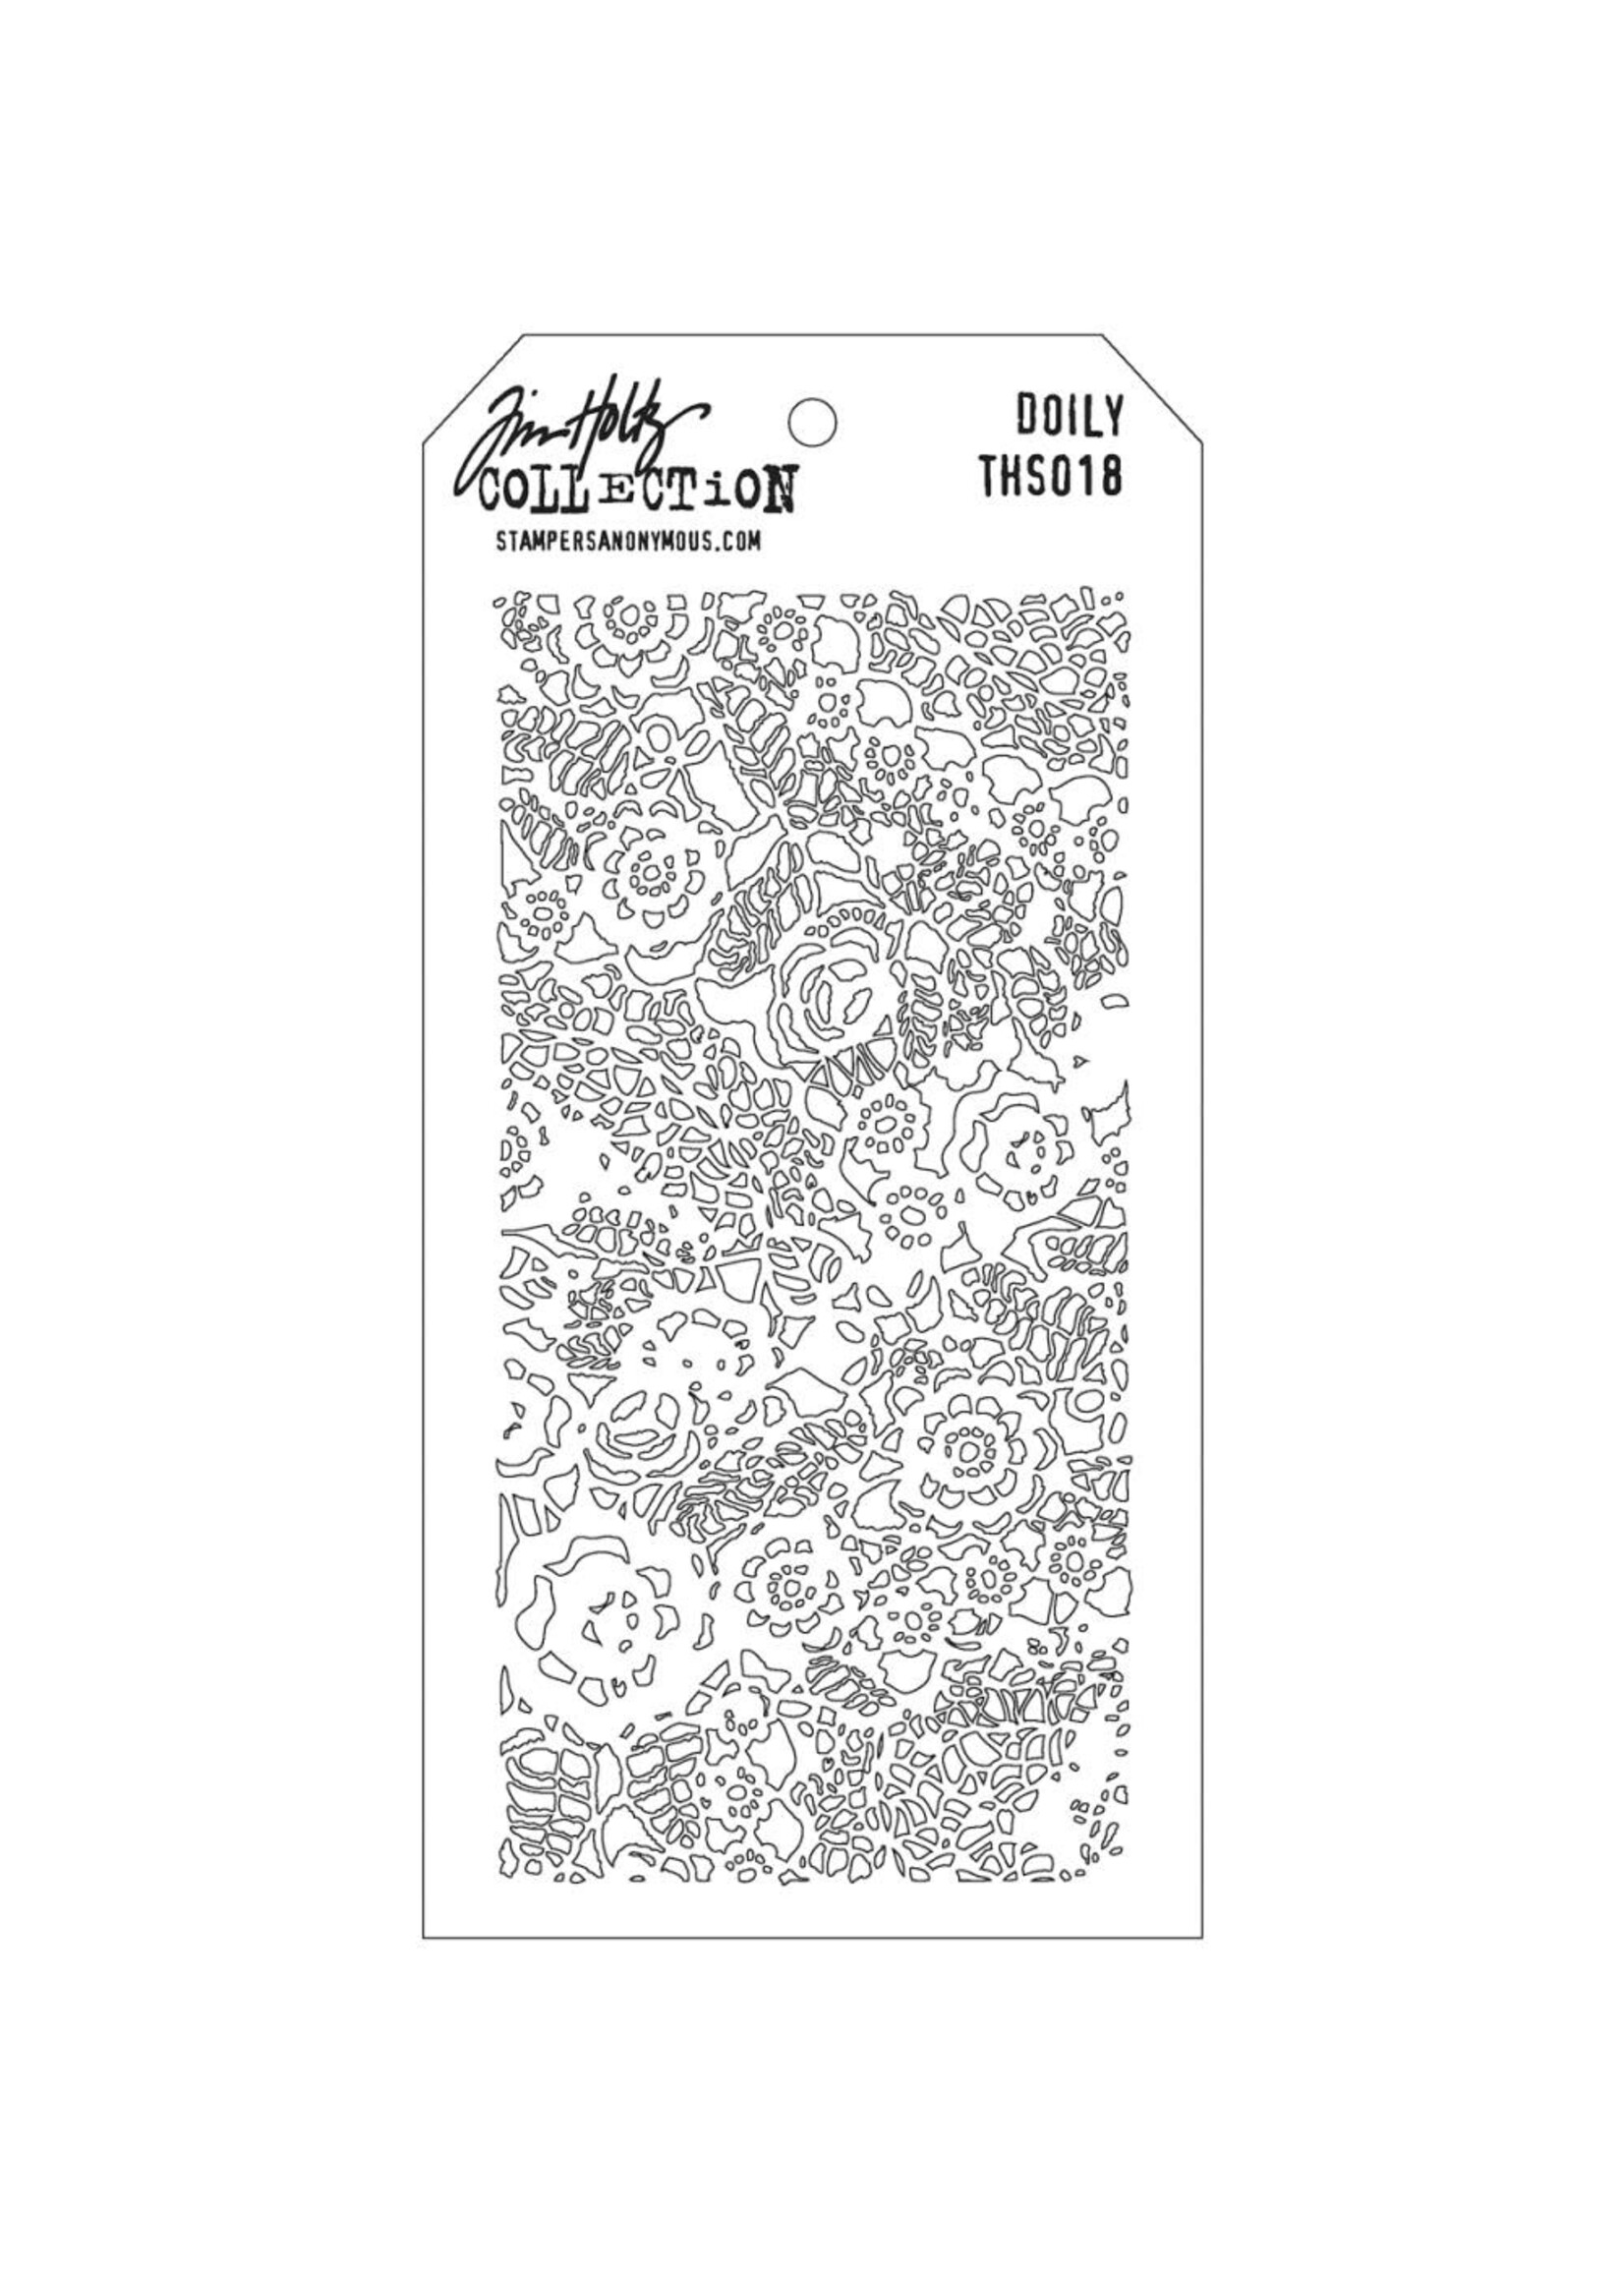 stampers anonymous Doily Layered Stencil